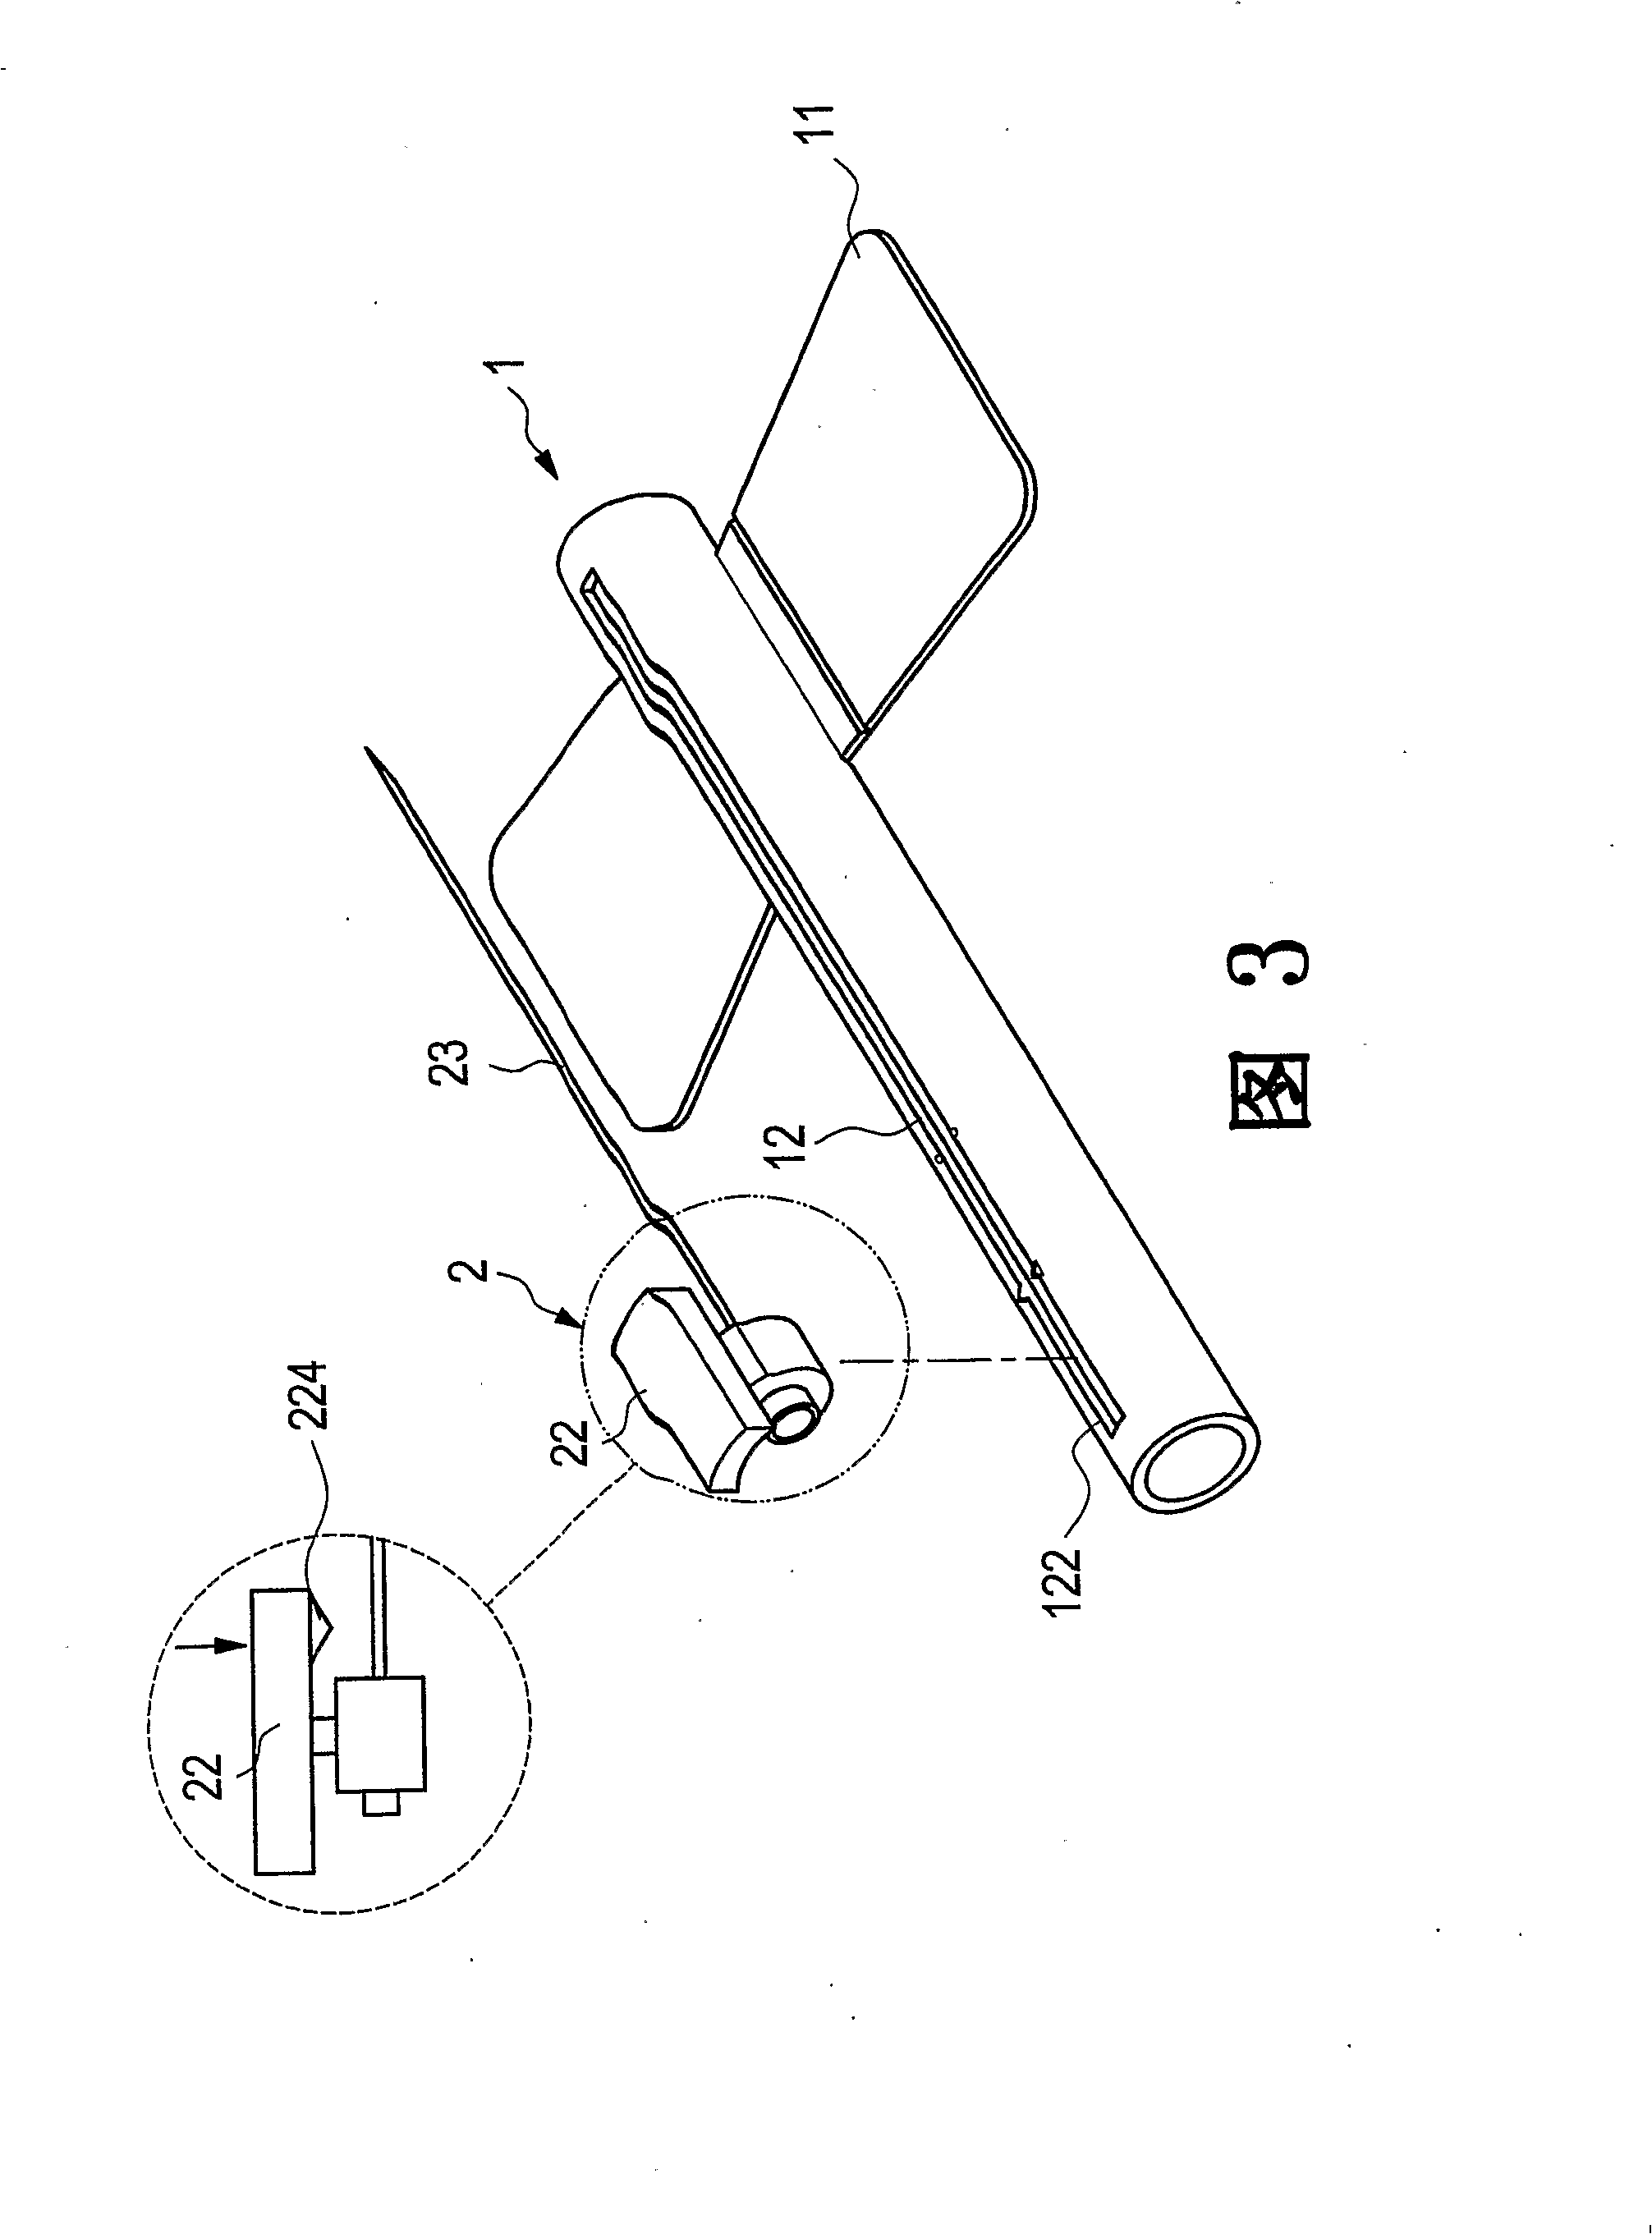 A disposable safety butterfly needle structure